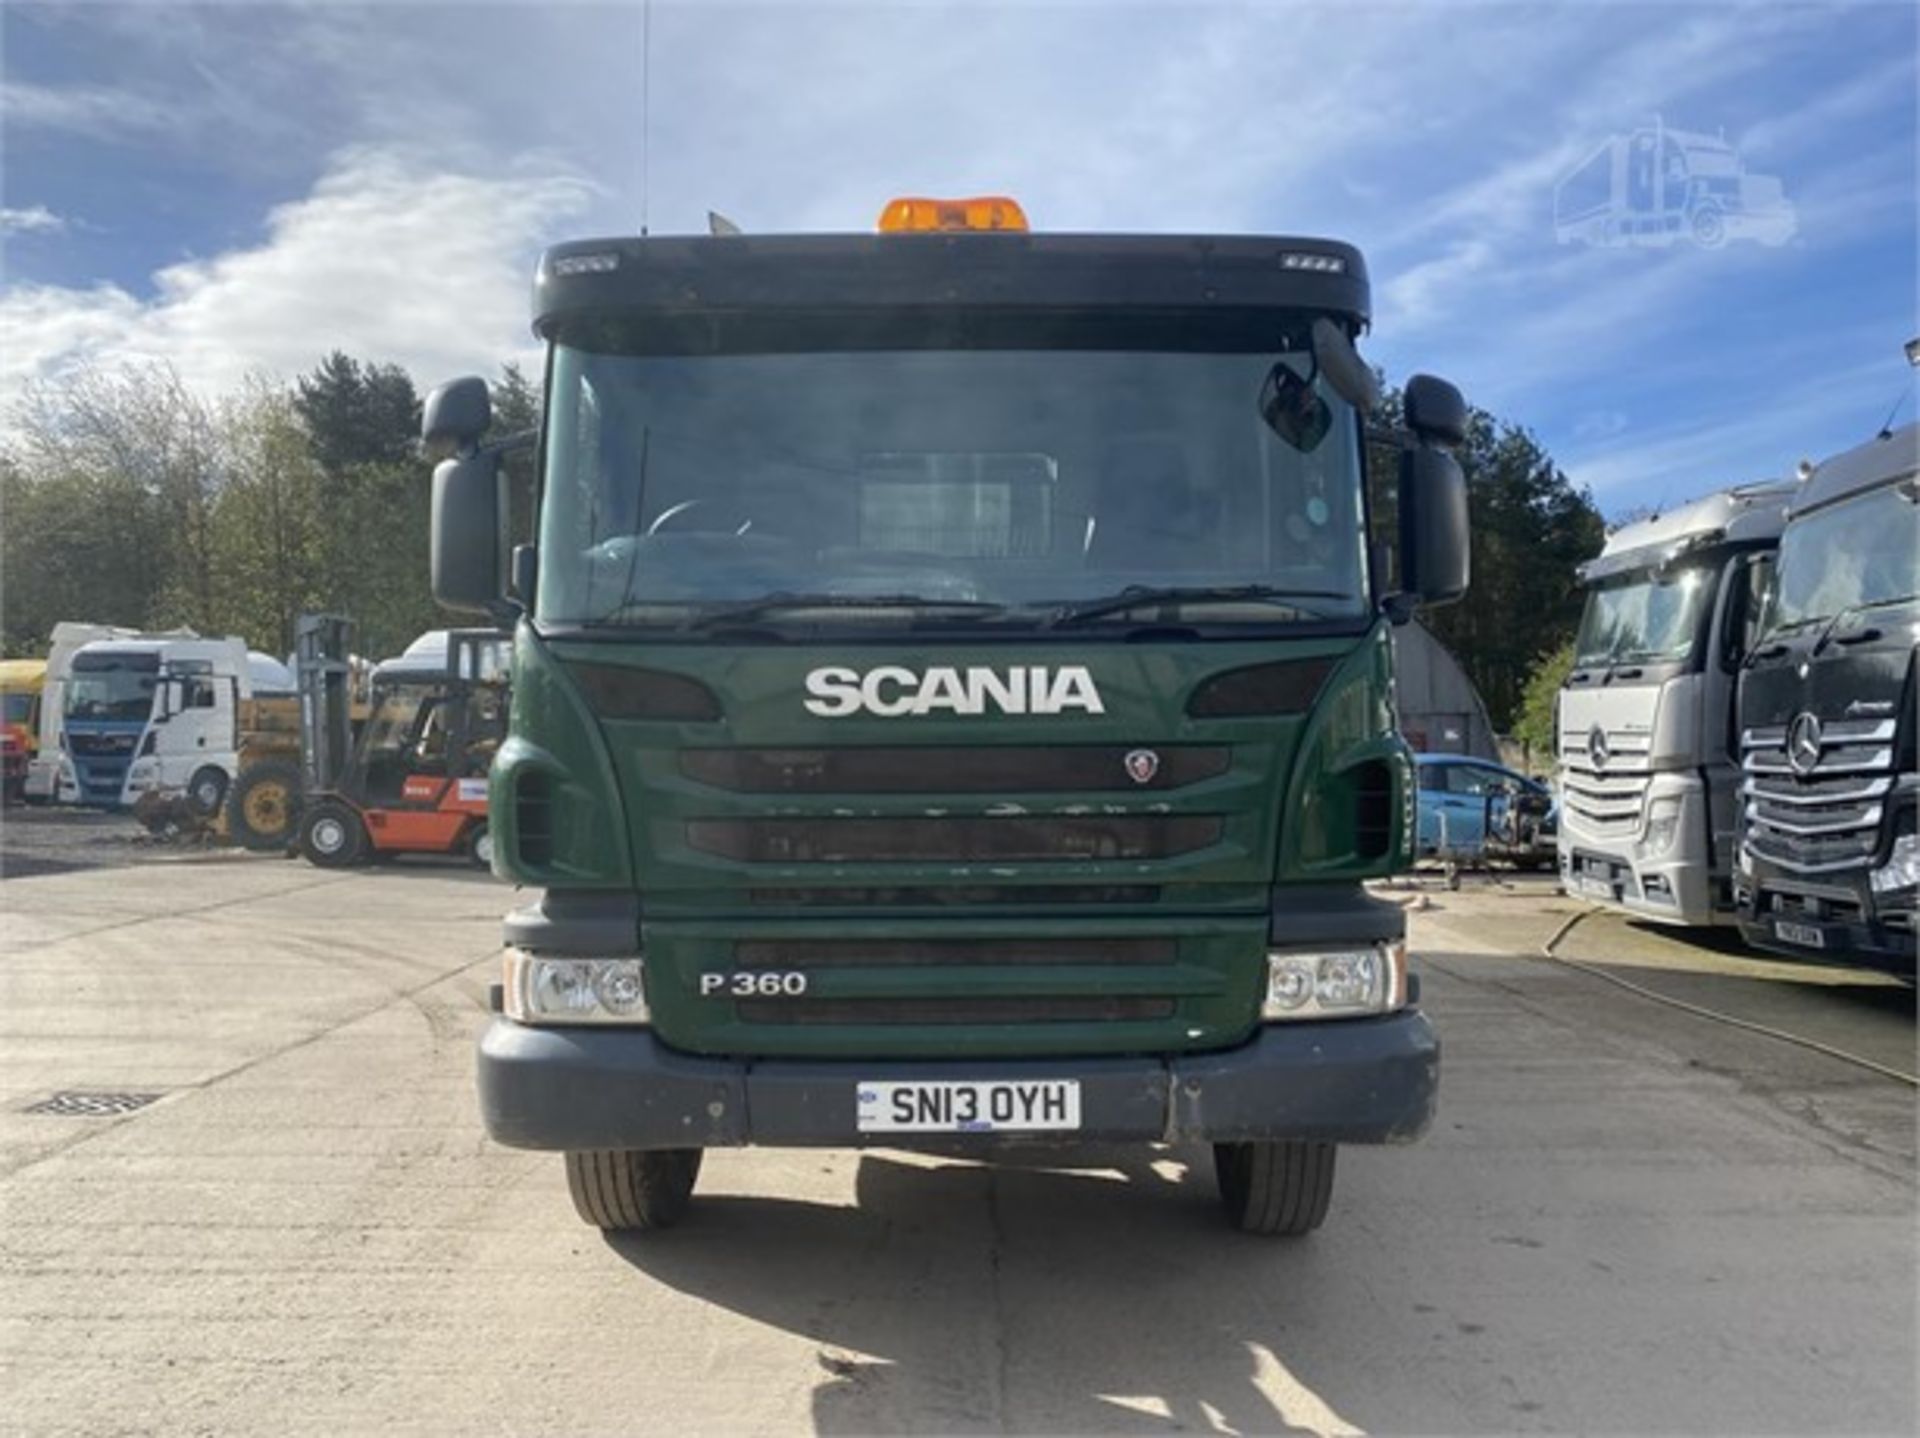 SCANIA P360 TIPPER TRUCK - Image 5 of 17